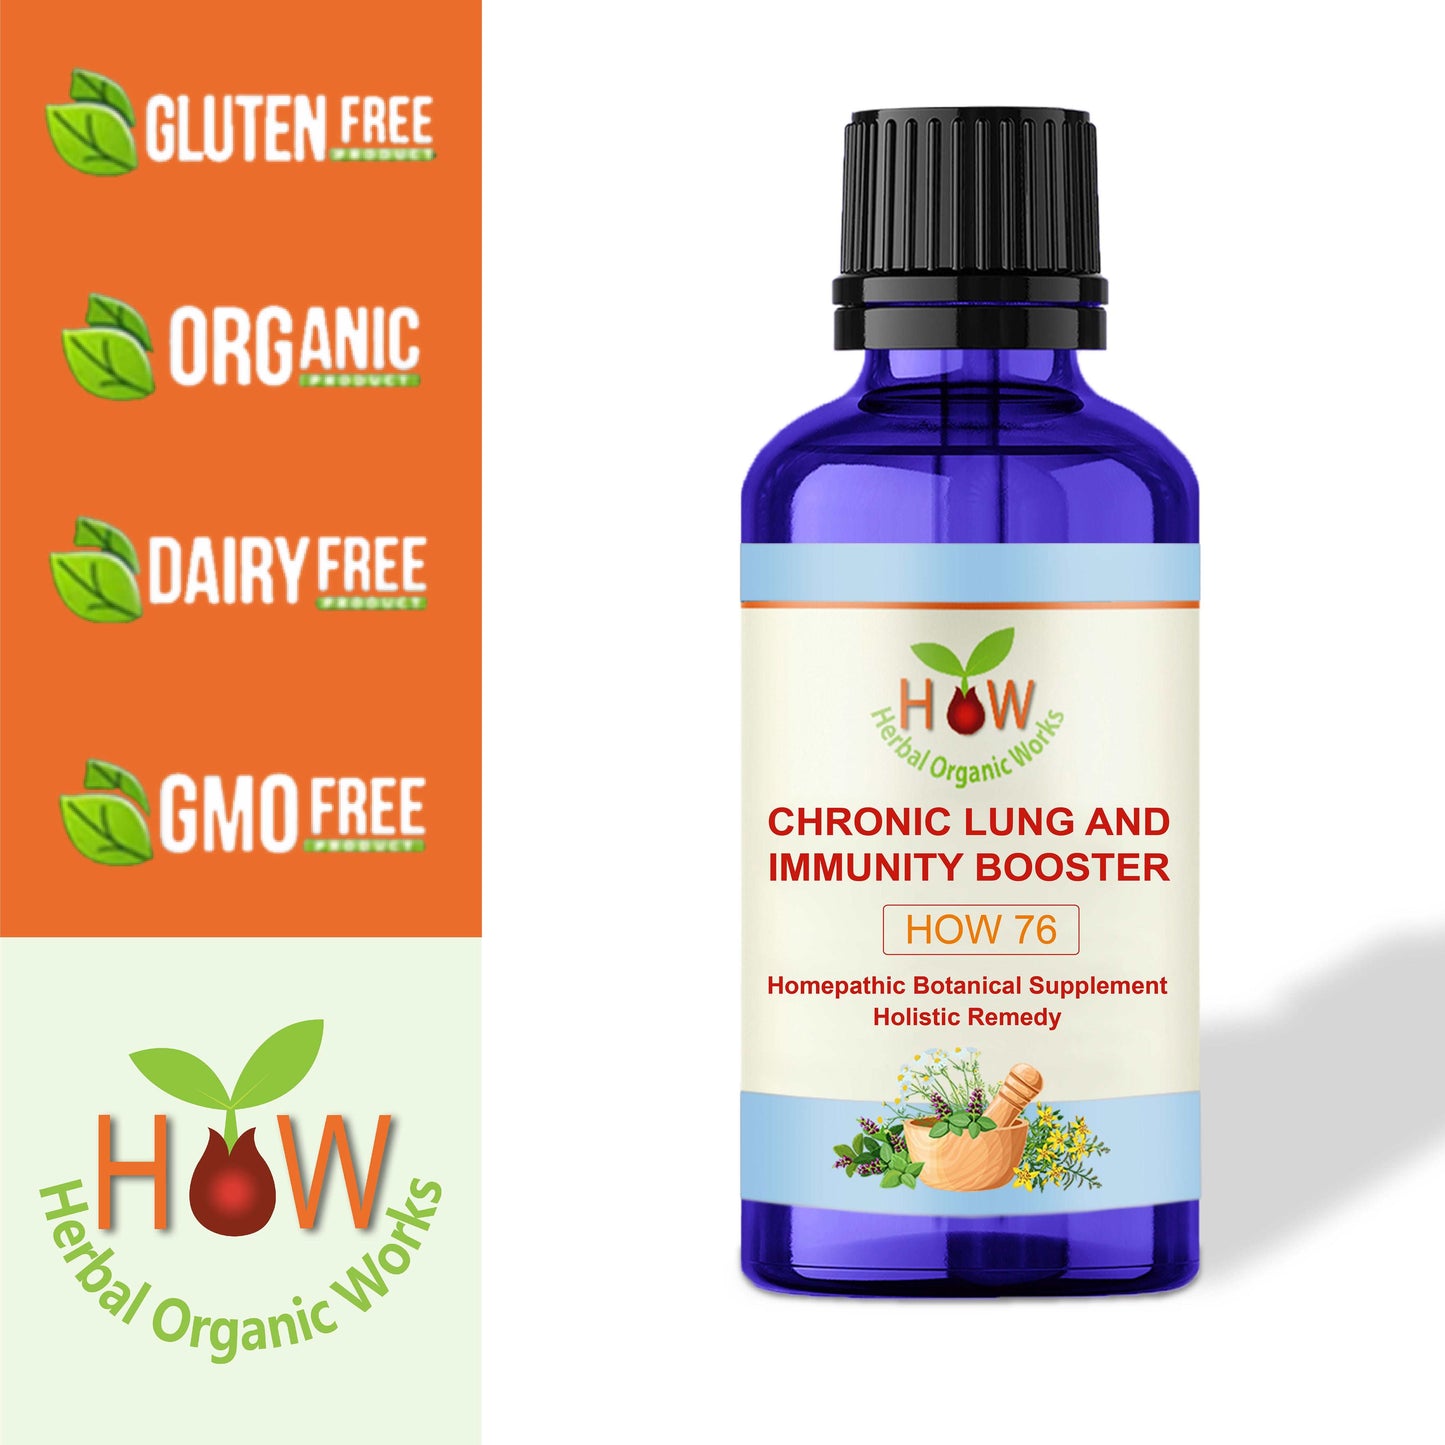 CHRONIC LUNG AND IMMUNITY BOOSTER (HOW 76)